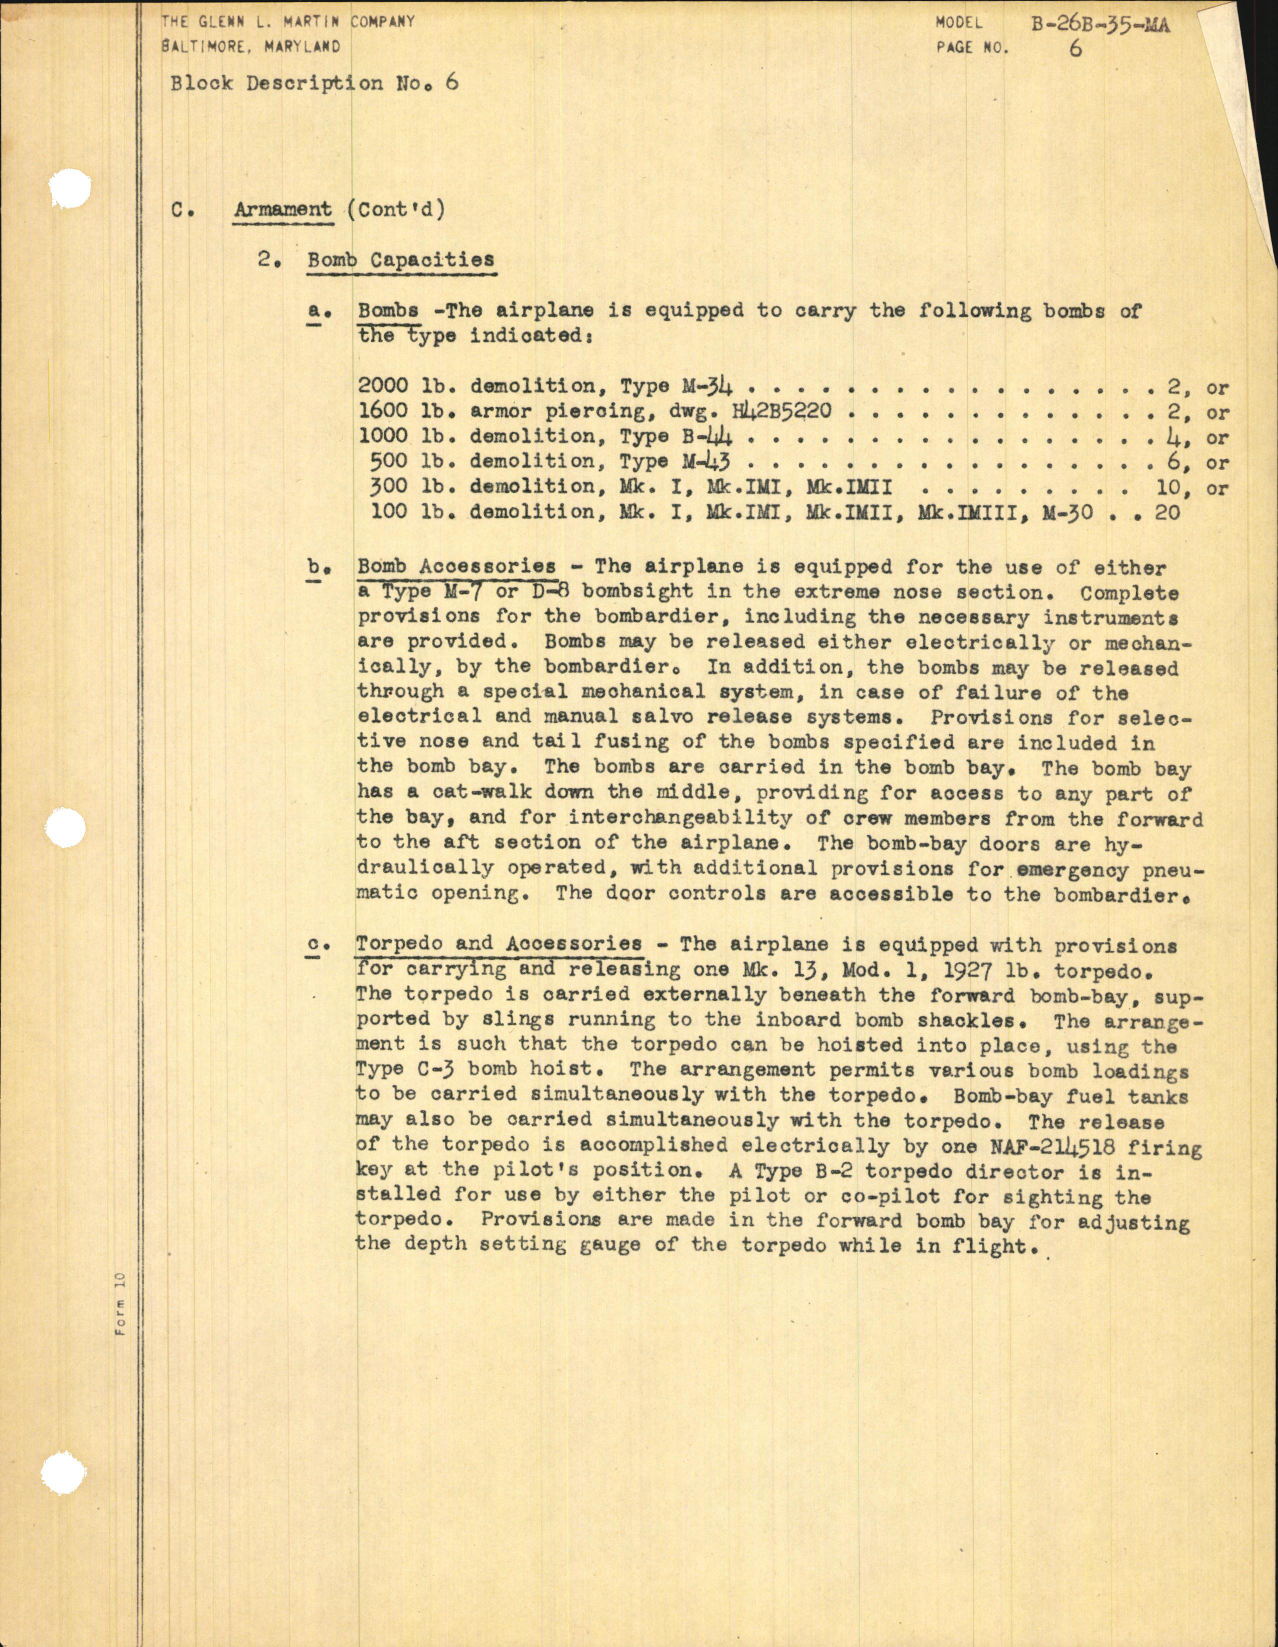 Sample page 15 from AirCorps Library document: Block Description for Air Corps Model B-26B-35-MA Bombardment Airplane